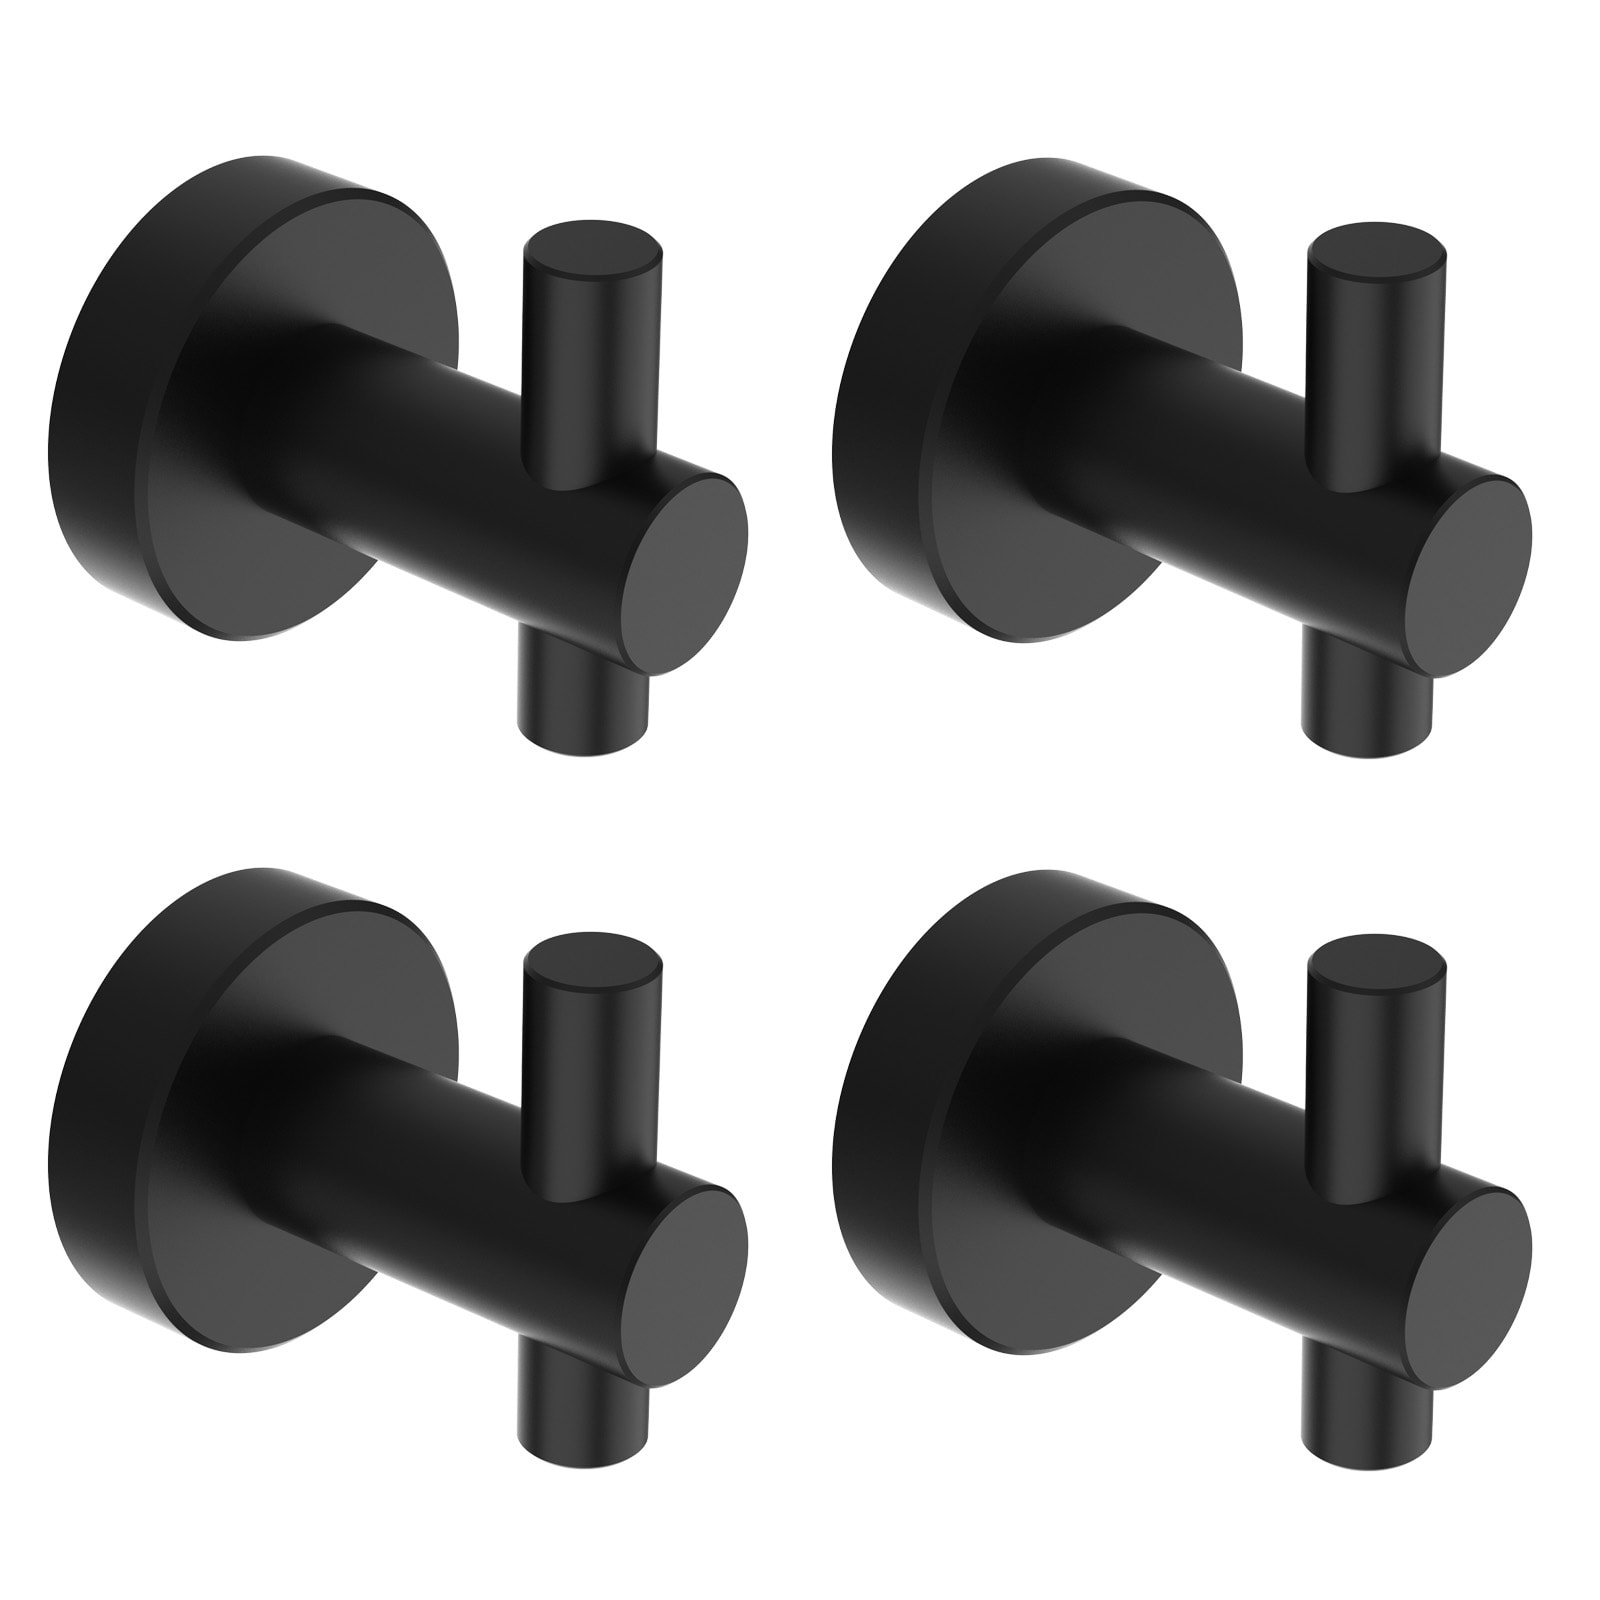 https://ak1.ostkcdn.com/images/products/is/images/direct/6c4287474e7b051ed3ff8356738c438572111182/Wall-Mount-Towel-Hooks-4-Pack-Bathroom-Robe-Hook-for-Cabinet-Closet-Door-Heavy-Duty-Wall-Hooks-for-Kitchen%2C-Hotel%2C-Washroom.jpg